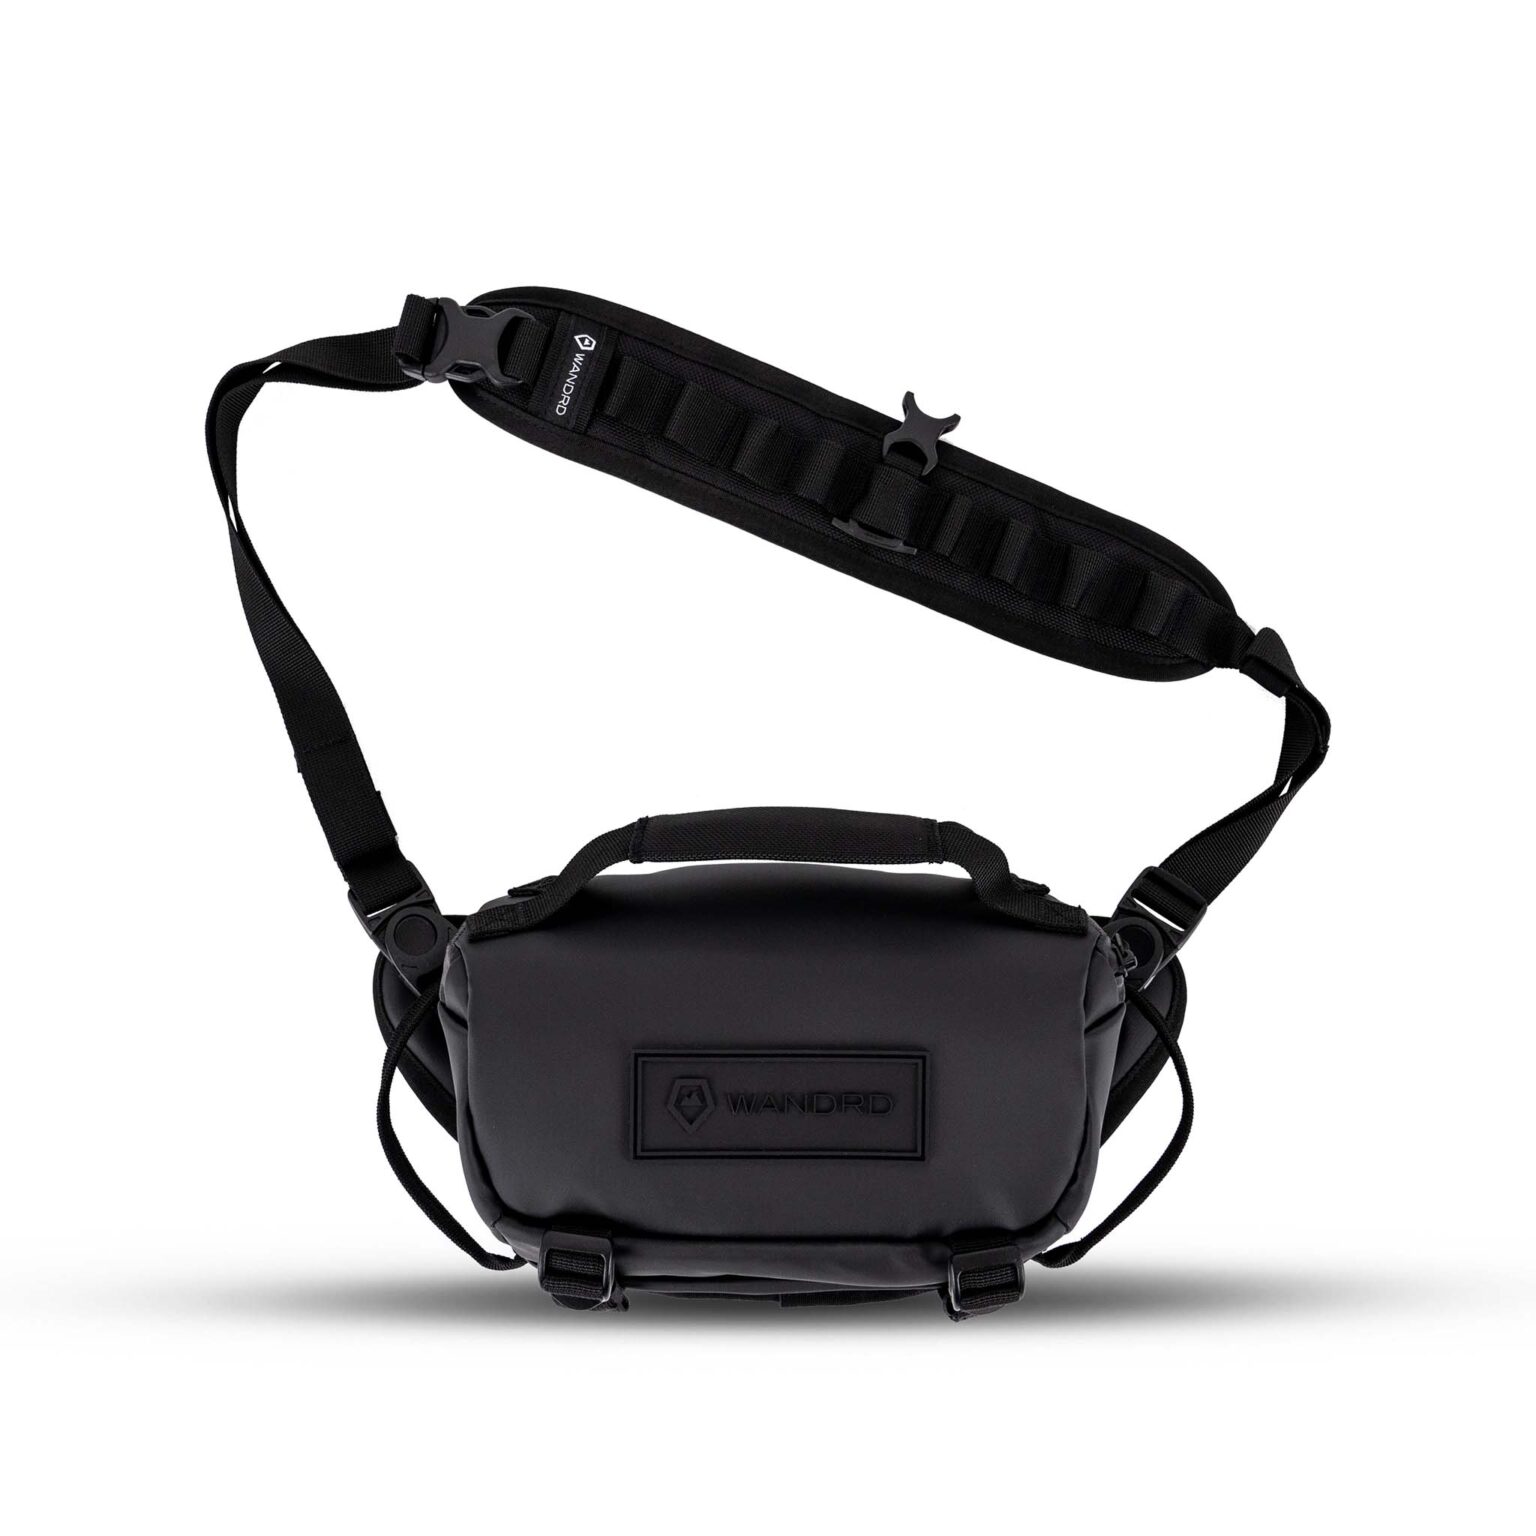 WANDRD ROAM Sling Now Available Directly and First Hand Account - Fuji ...